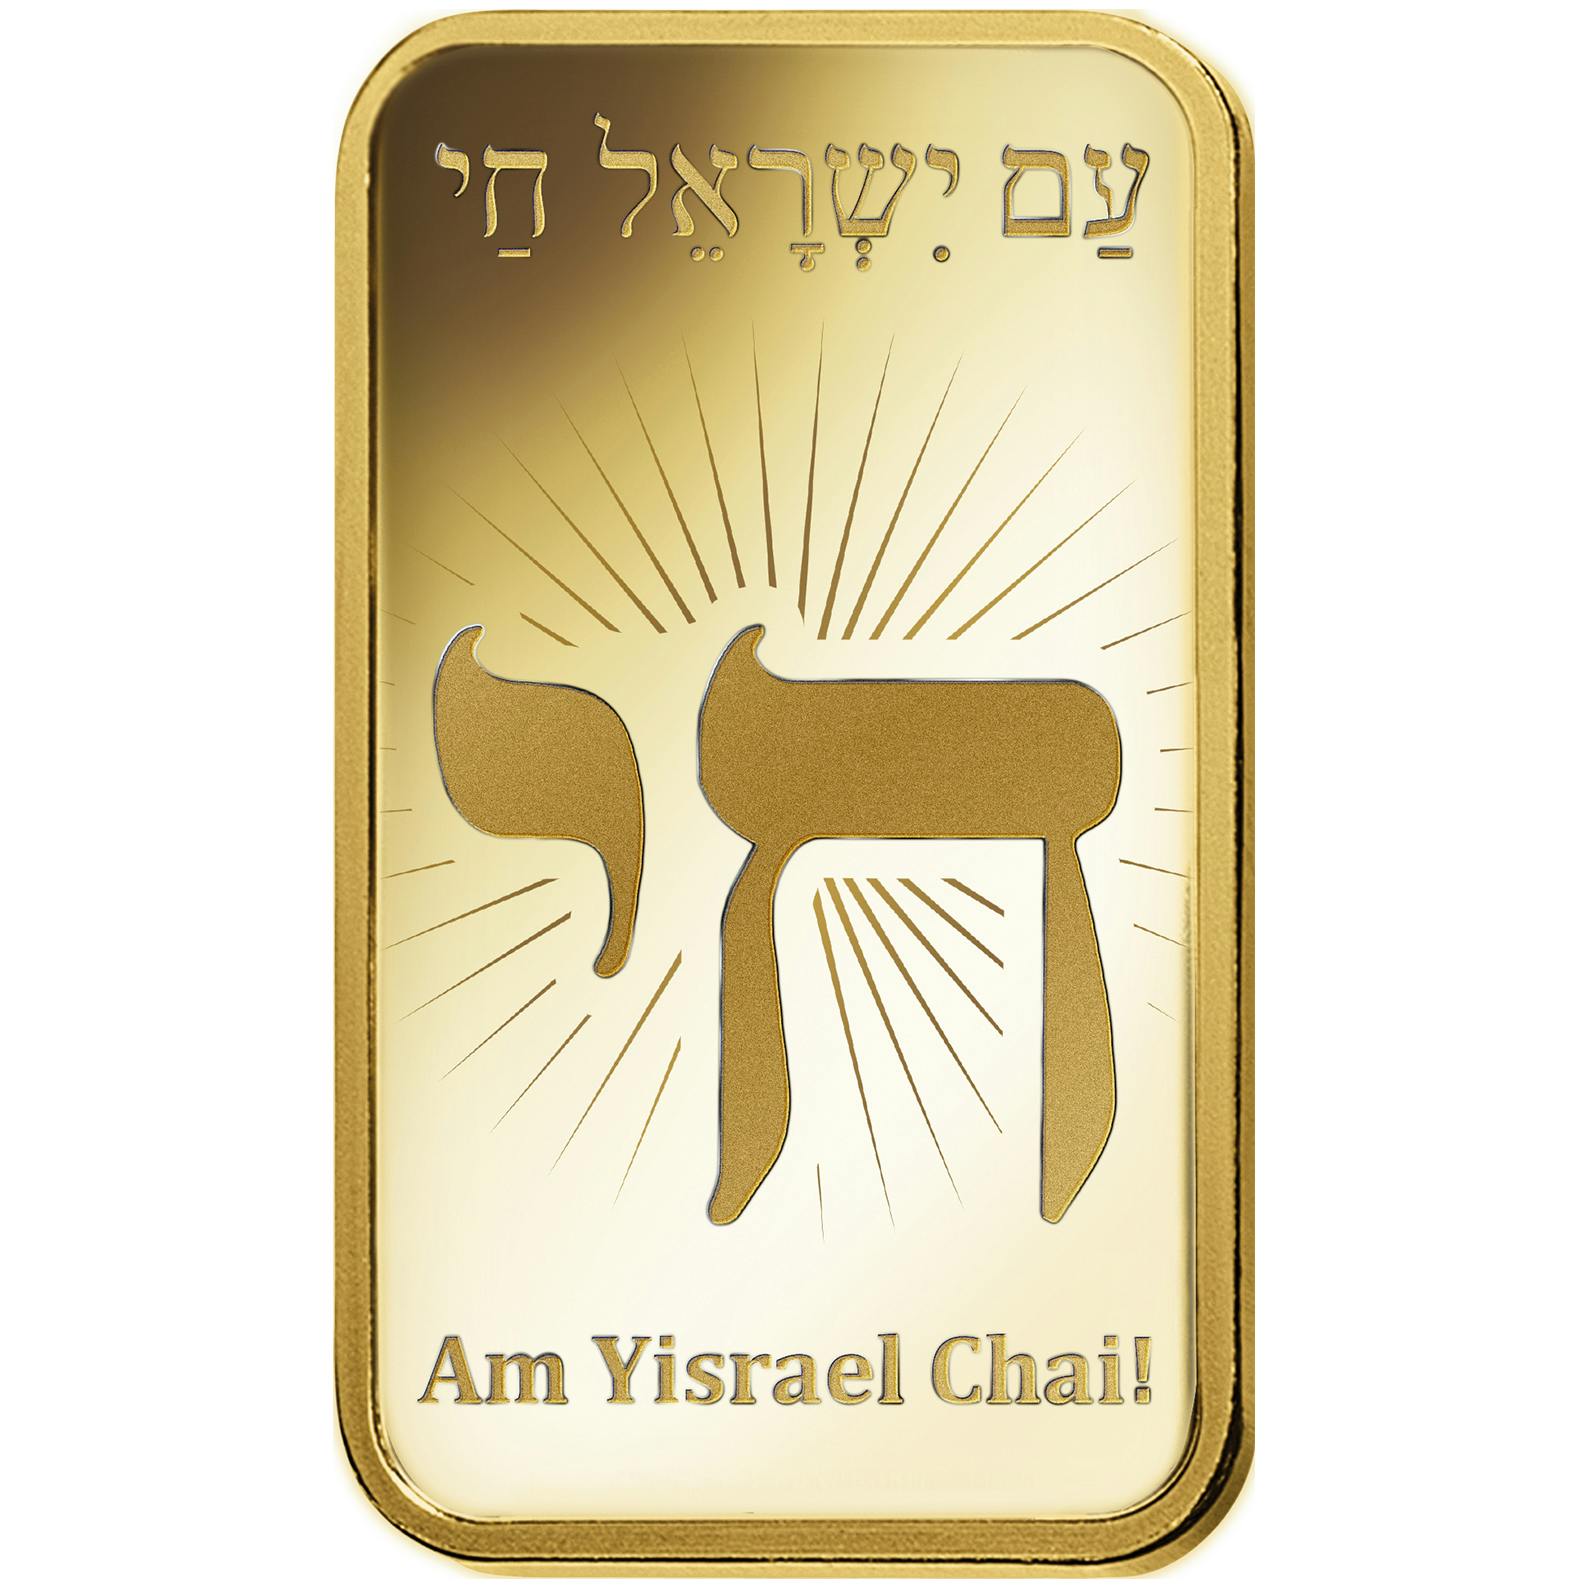 Achat d'or, 5 gram d'or pur Am Yisrael Chai - PAMP Suisse - Front 